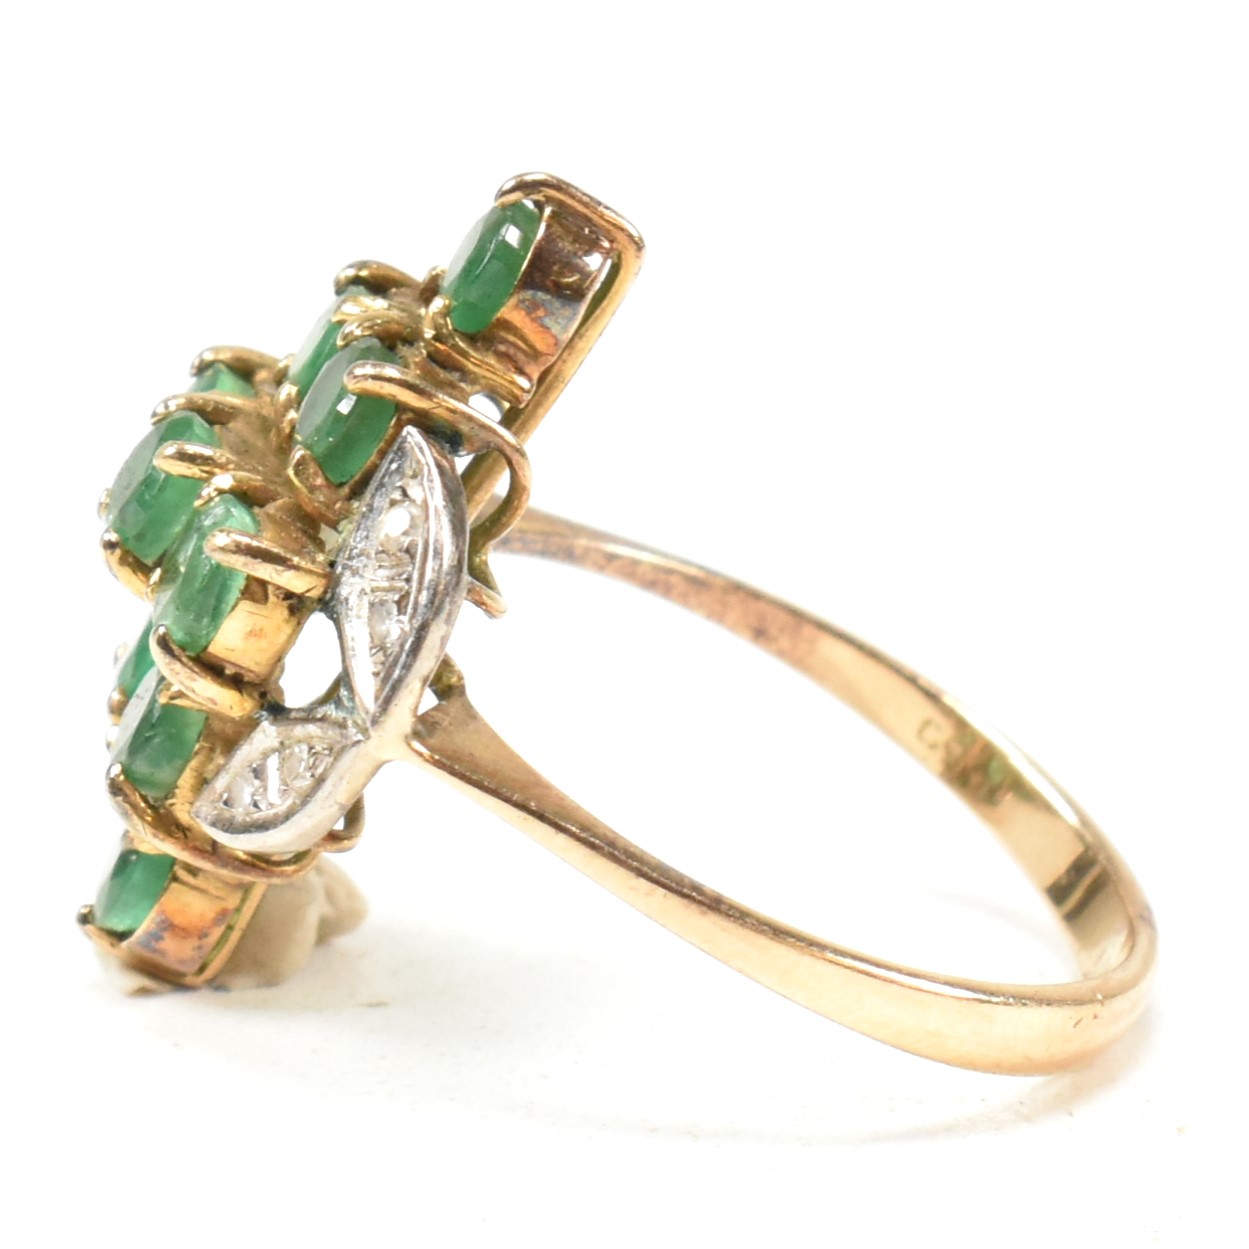 EMERALD & DIAMOND CLUSTER RING - Image 5 of 8